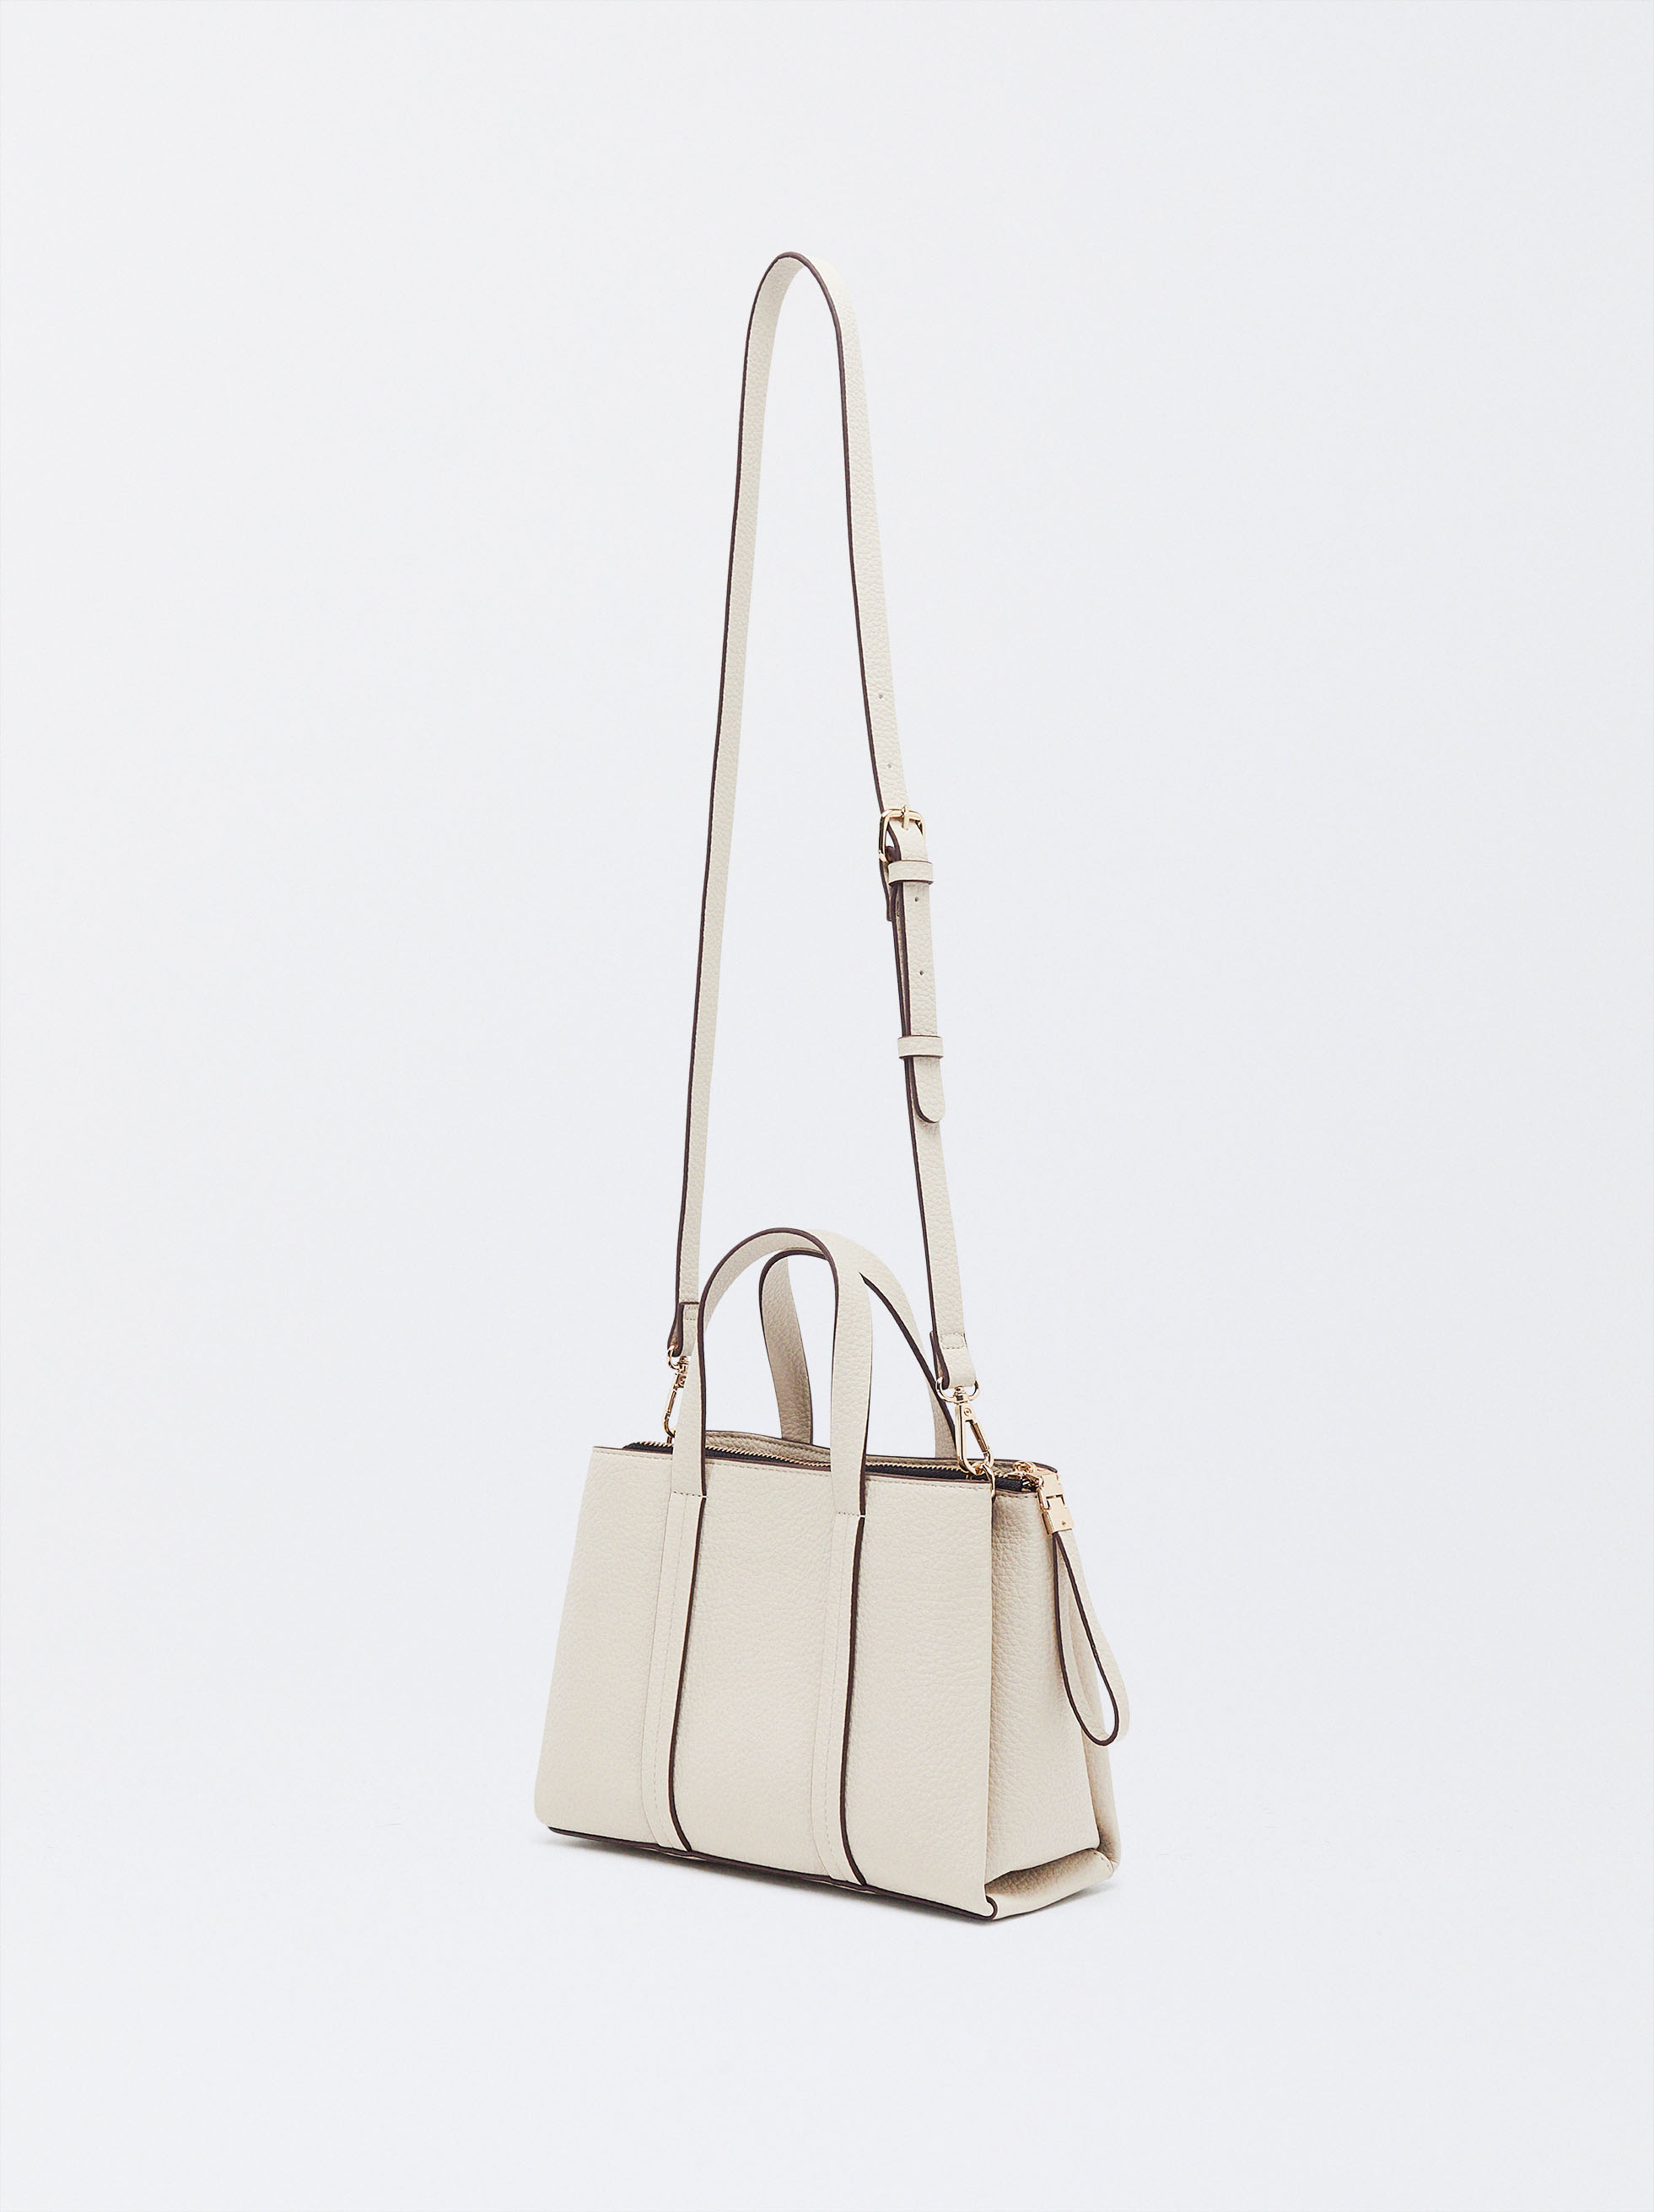 Torba Tote „Everyday” S image number 2.0